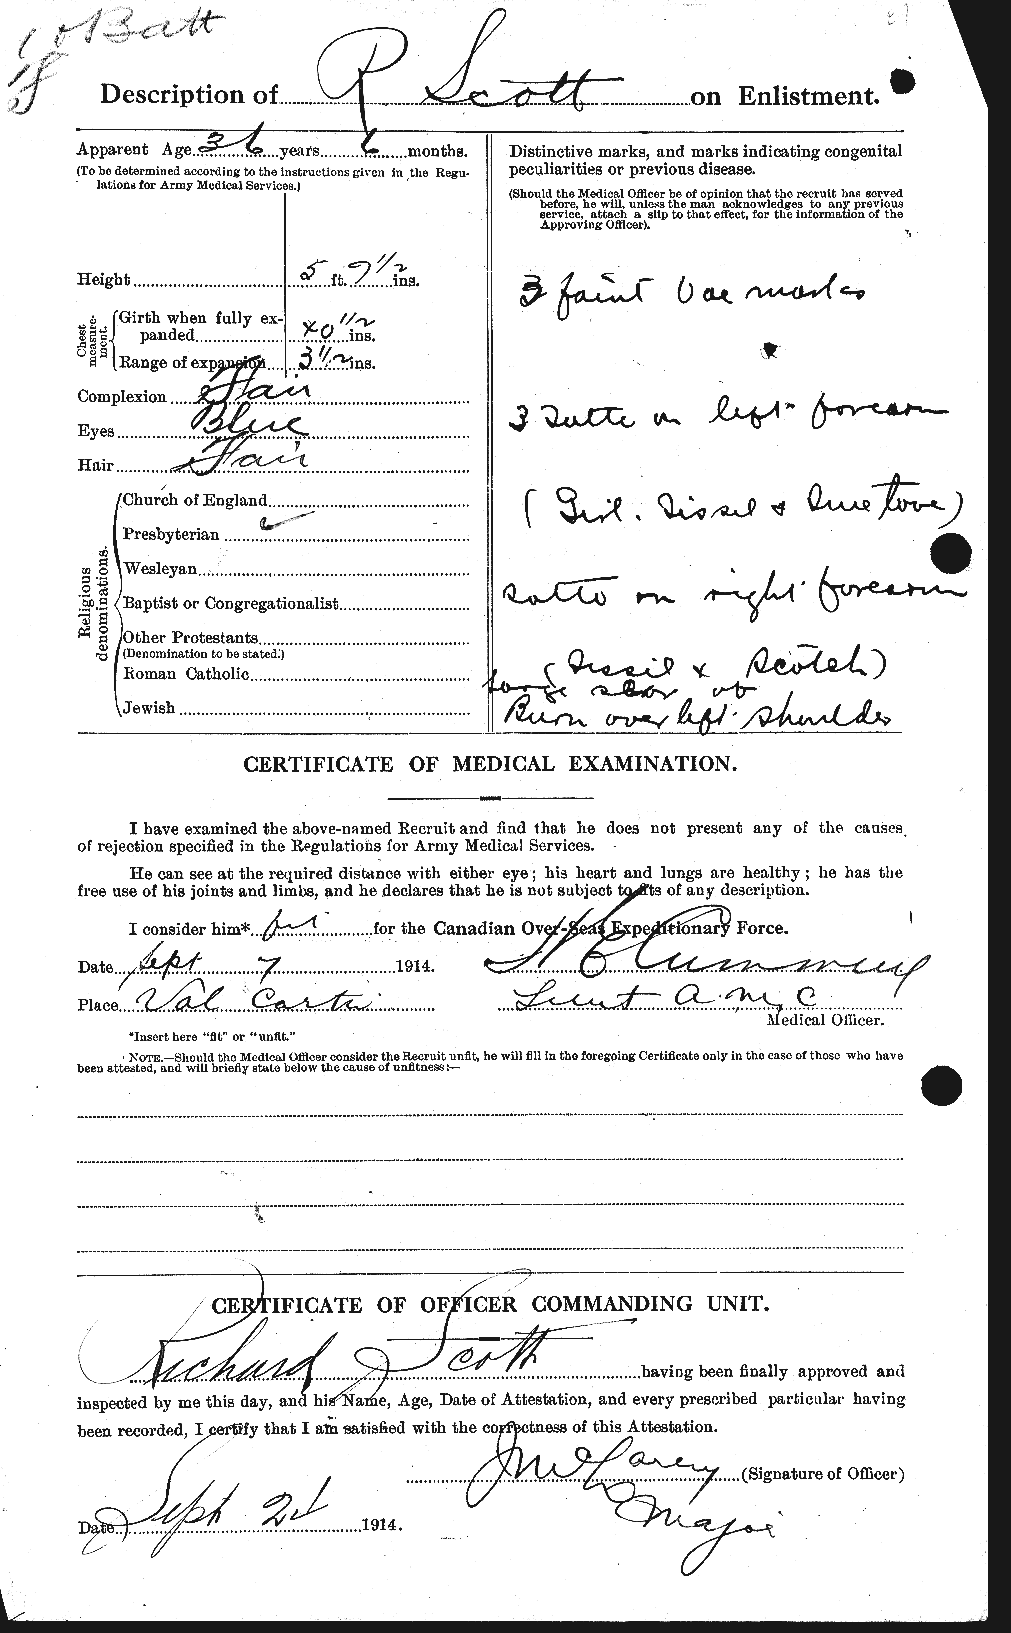 Personnel Records of the First World War - CEF 090182b